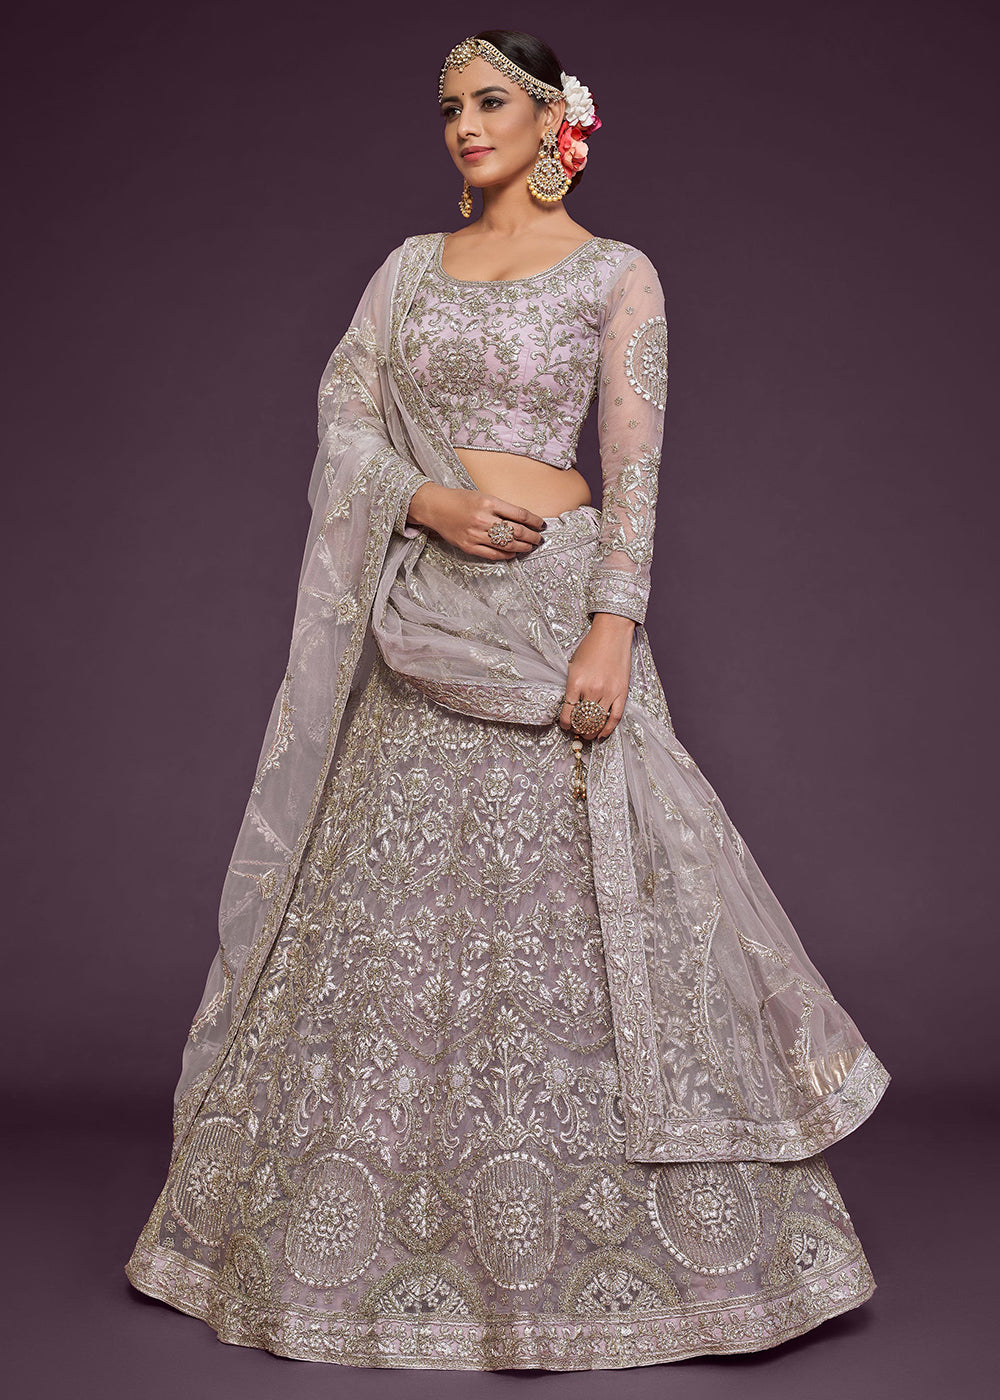 Bollywood Brides are Rewriting the Bridal Rulebook with Pastels, Personal  Touches, and Timeless Pieces | GlobalSpa - Beauty, Spa & Wellness, Luxury  Lifestyle Magazine Online